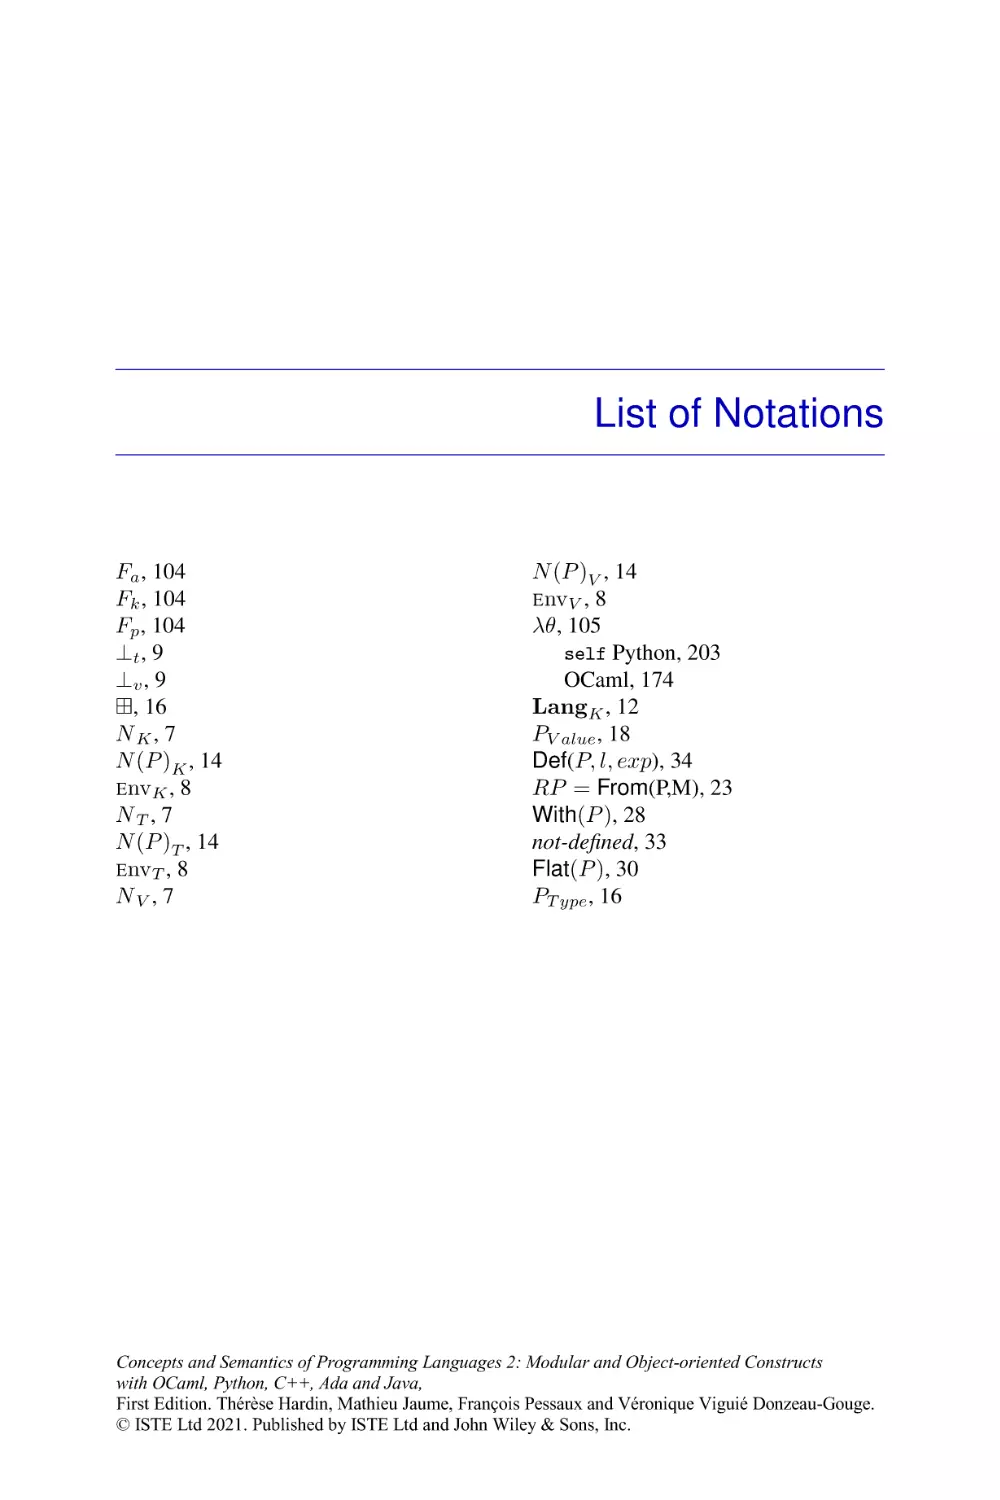 List of Notations